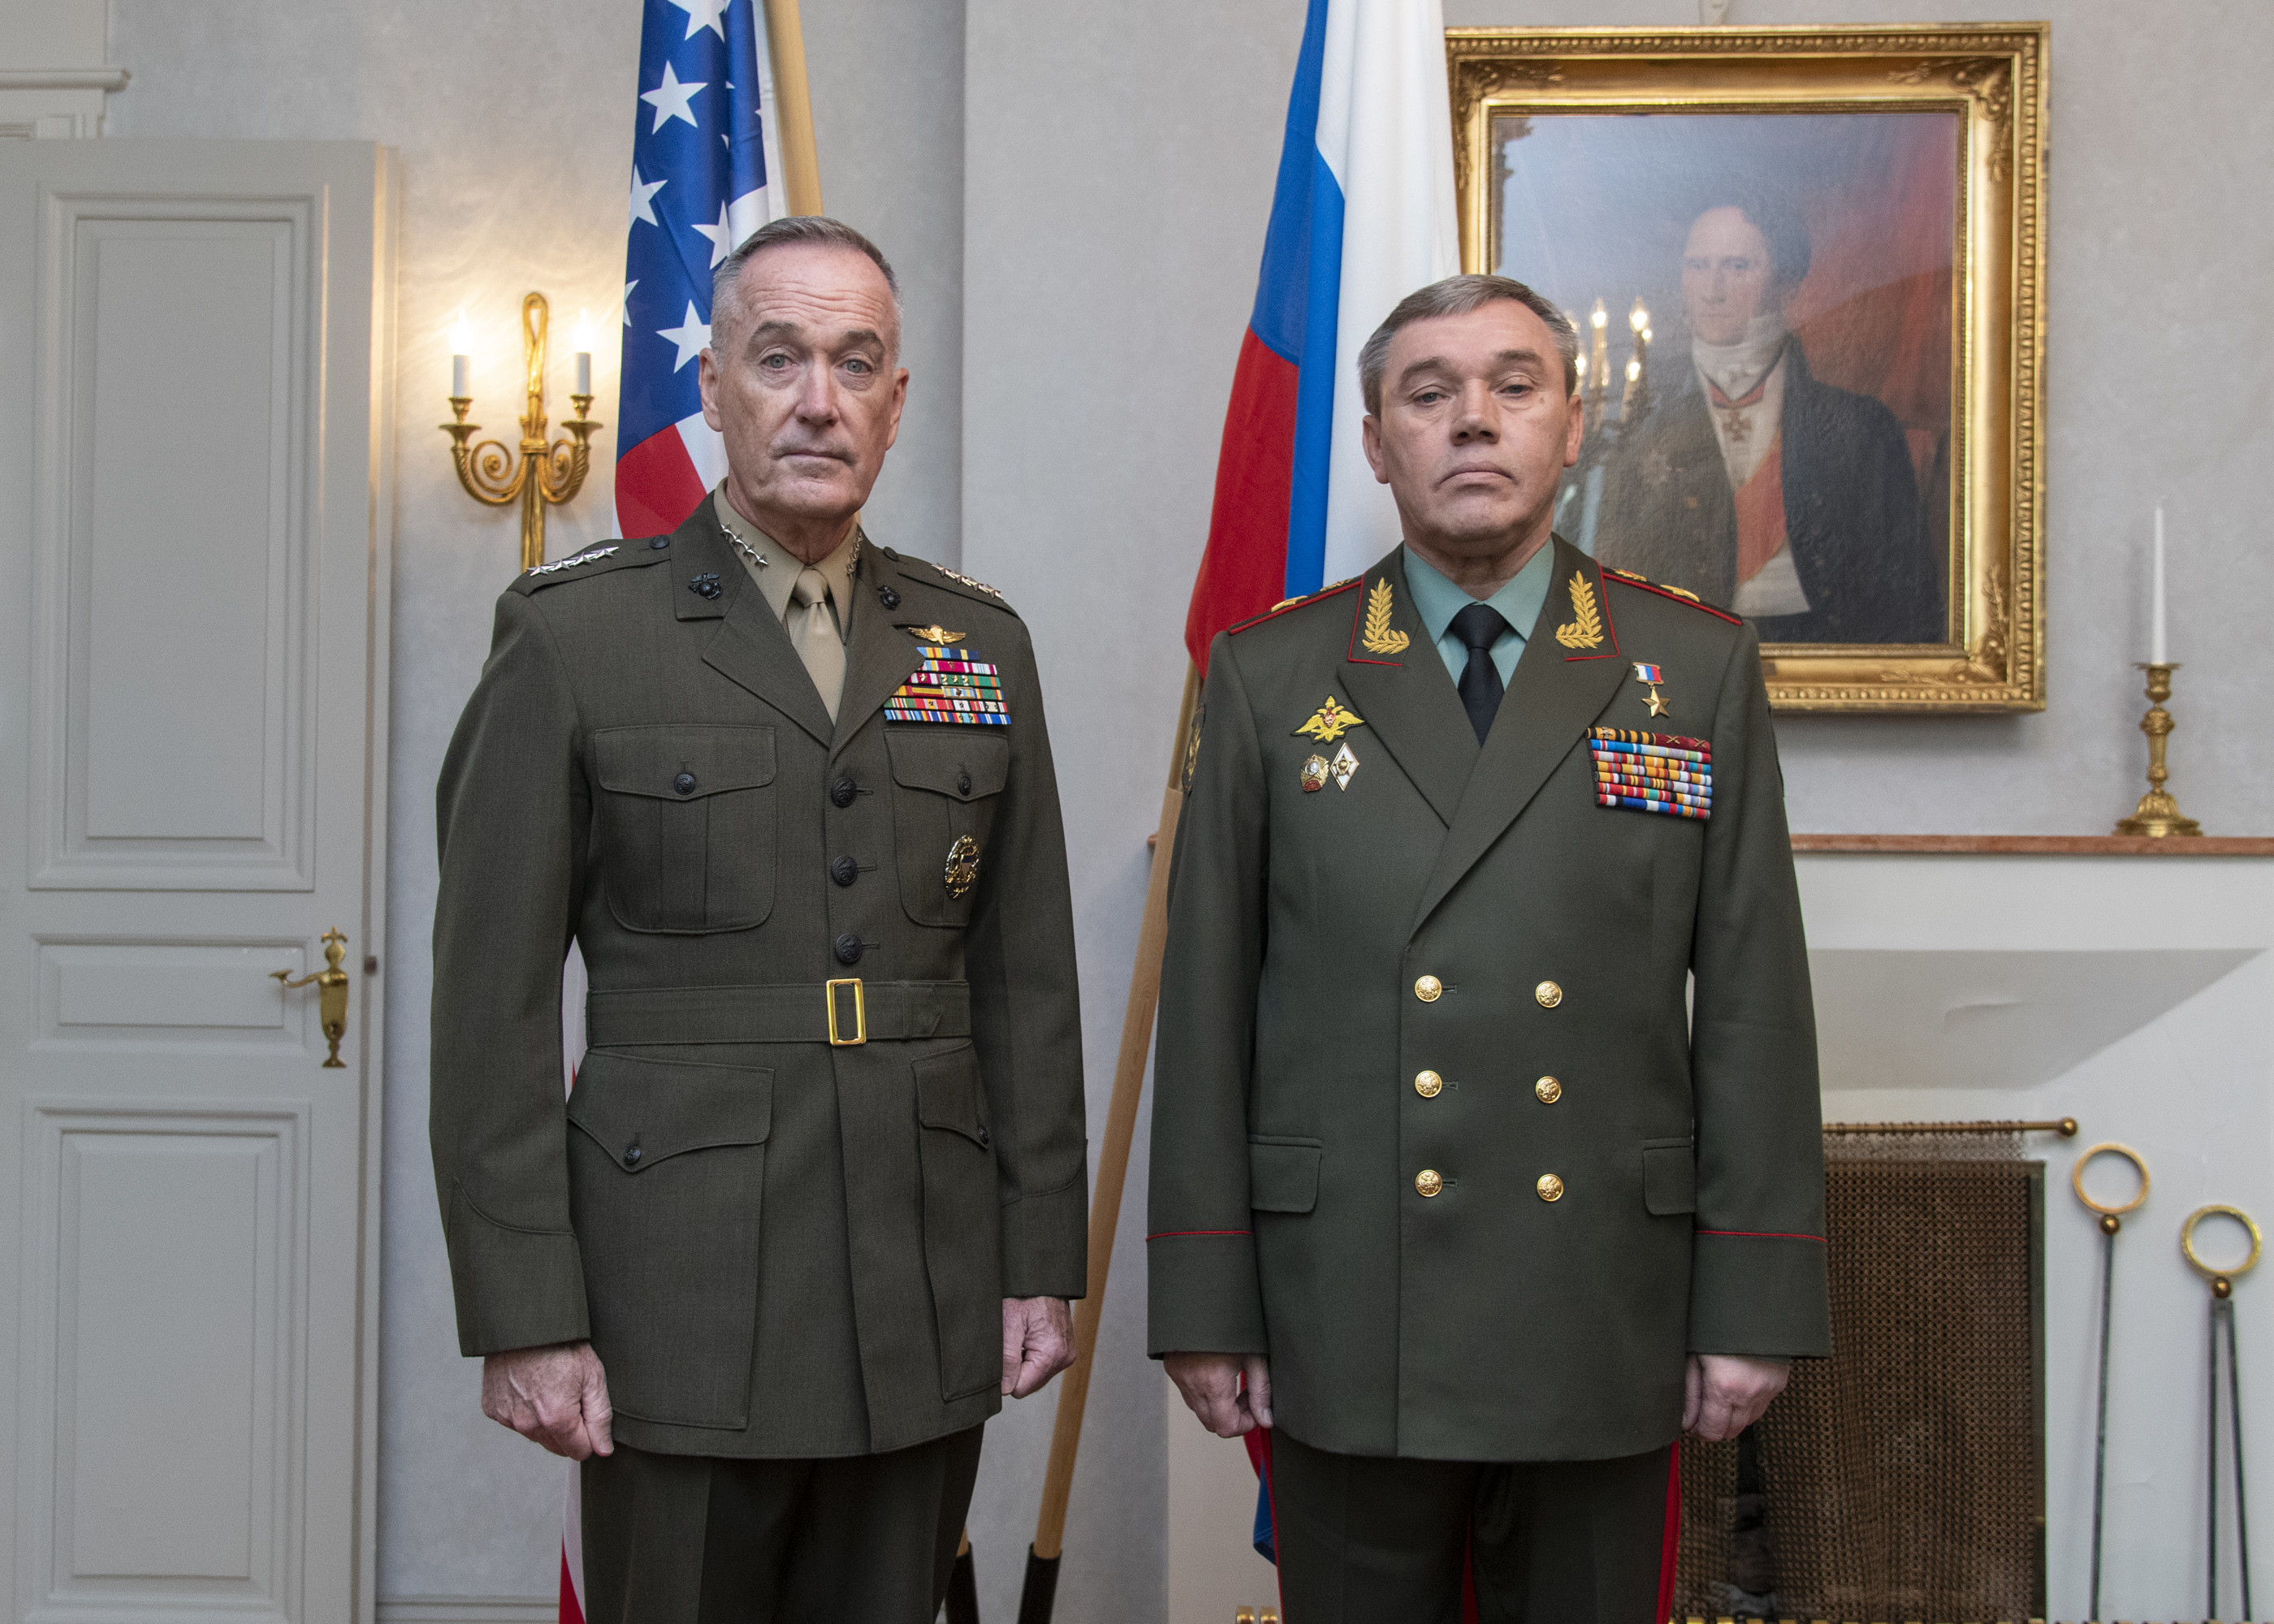 CJCS meets with Russian counterpart